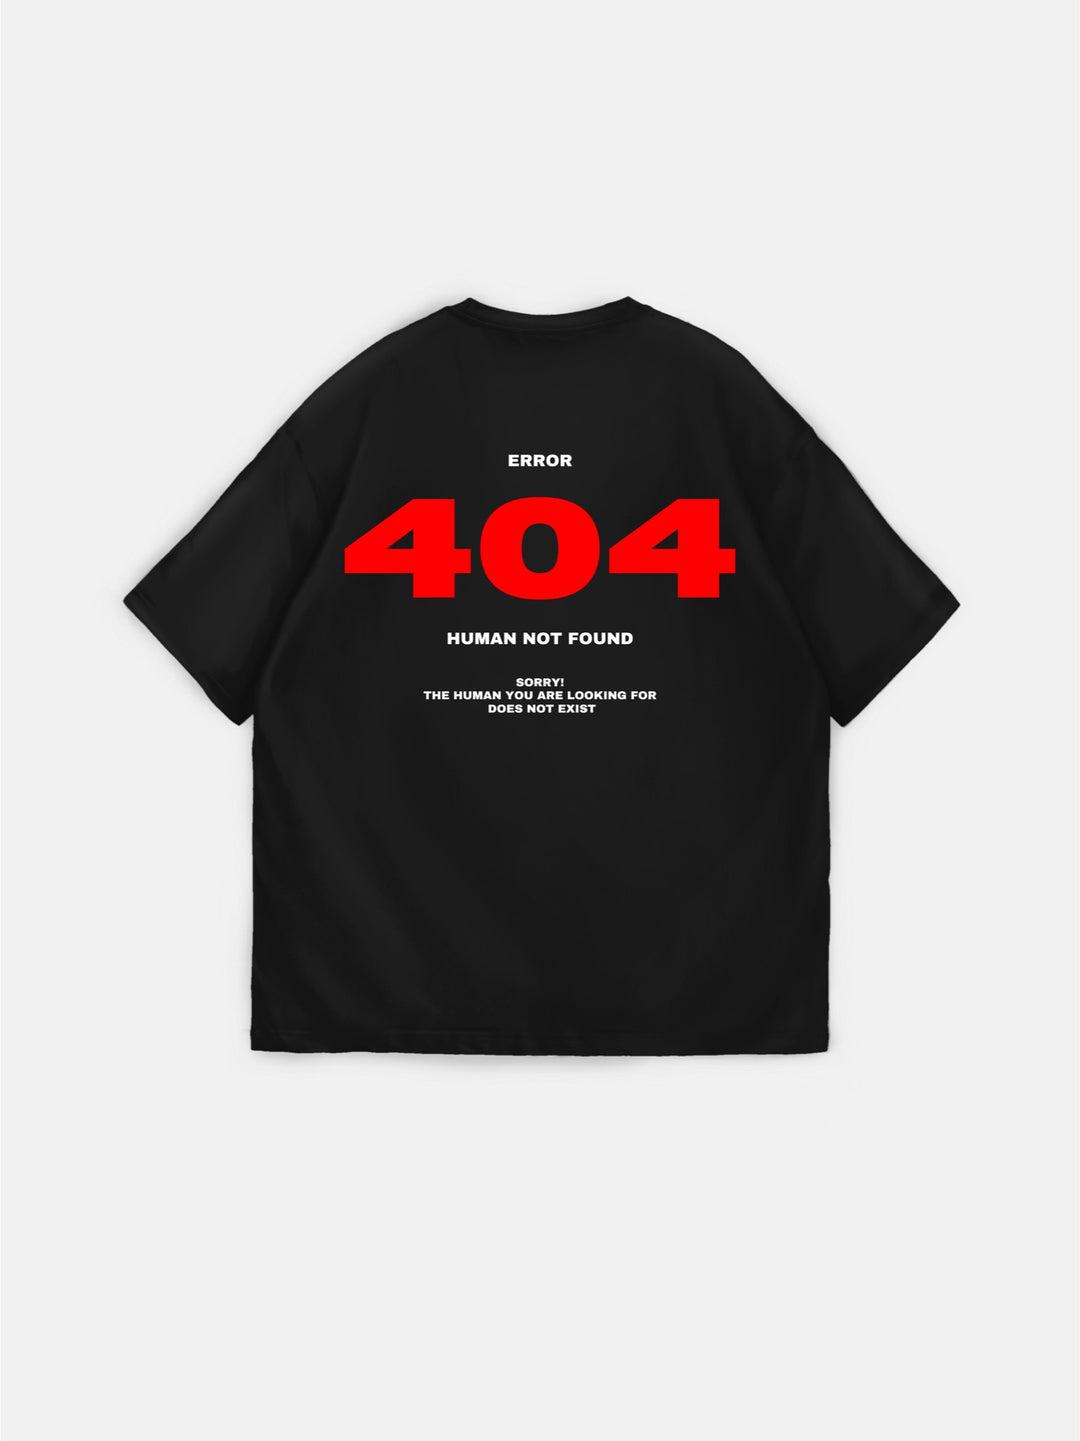 Oversize 404 T-shirt - Black and Red